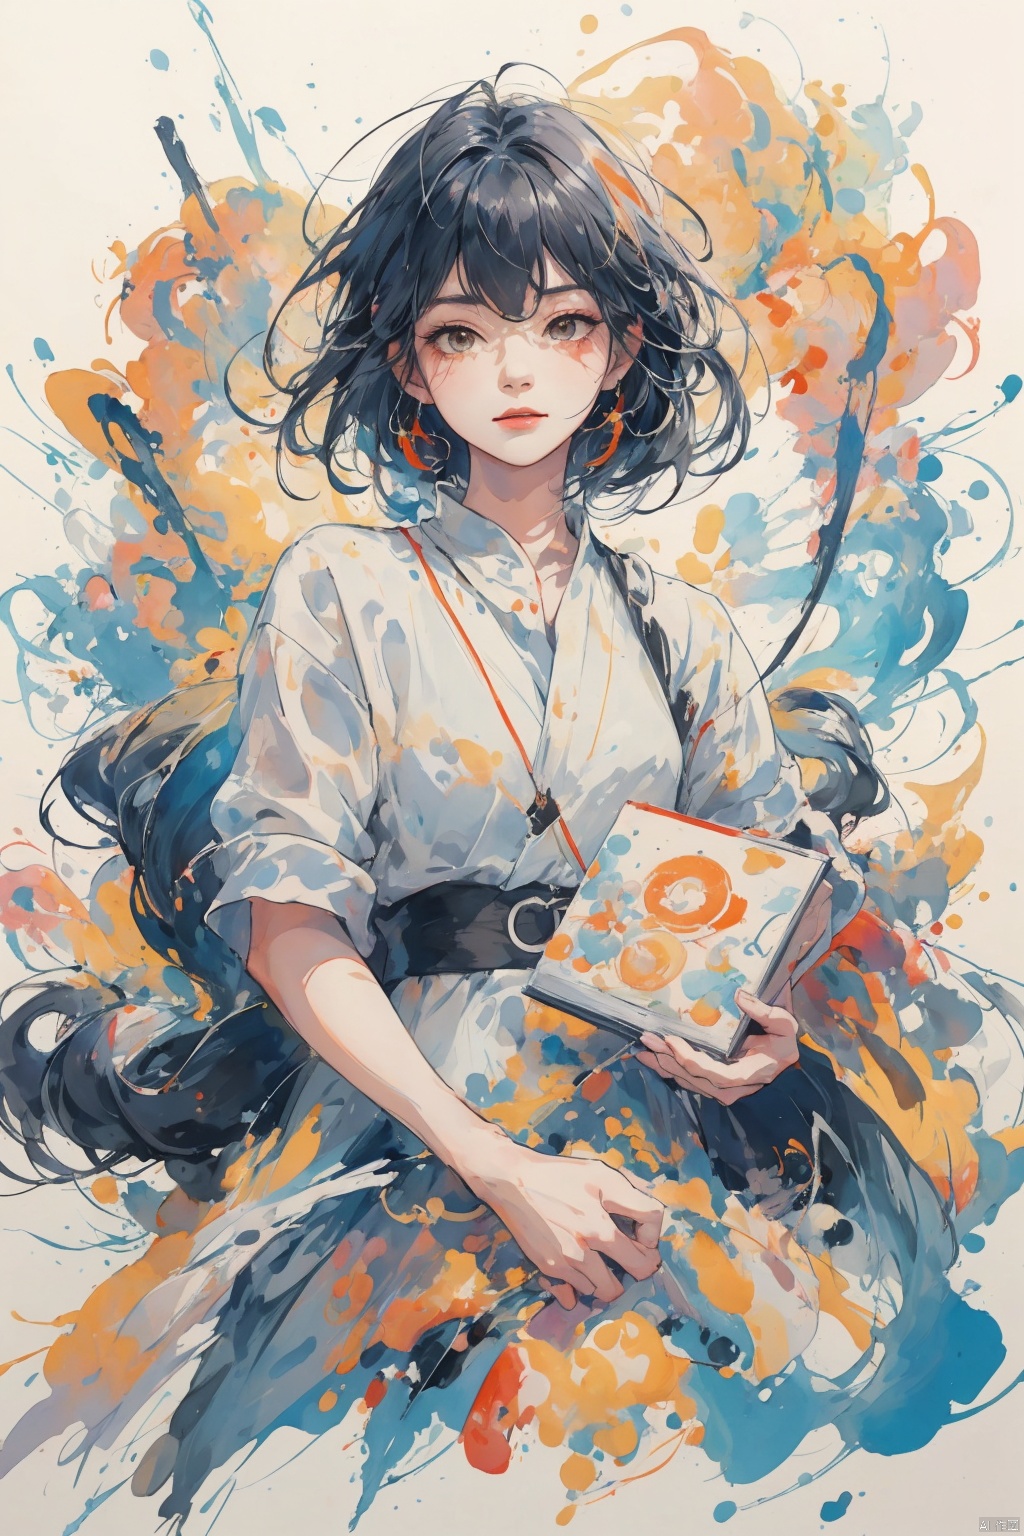  llustration style,dream ,A Sunshine Laughs girl with black hair and black eyes,enlarge Holding a magic and book wand in hand,rainbow Long dress ,Black Braid Fried Dough Twists Braid,8k, clear details, rich picture, nature background, flat color, vector illustration, watercolor, Chinese style, cute girl, Laughs Girl, TT, (/qingning/), (\MBTI\), (\lang lang\), babata, (\shen ming shao nv\), jiqing,wings, ((poakl)), （\personality\）, myinv, w_(arknights)